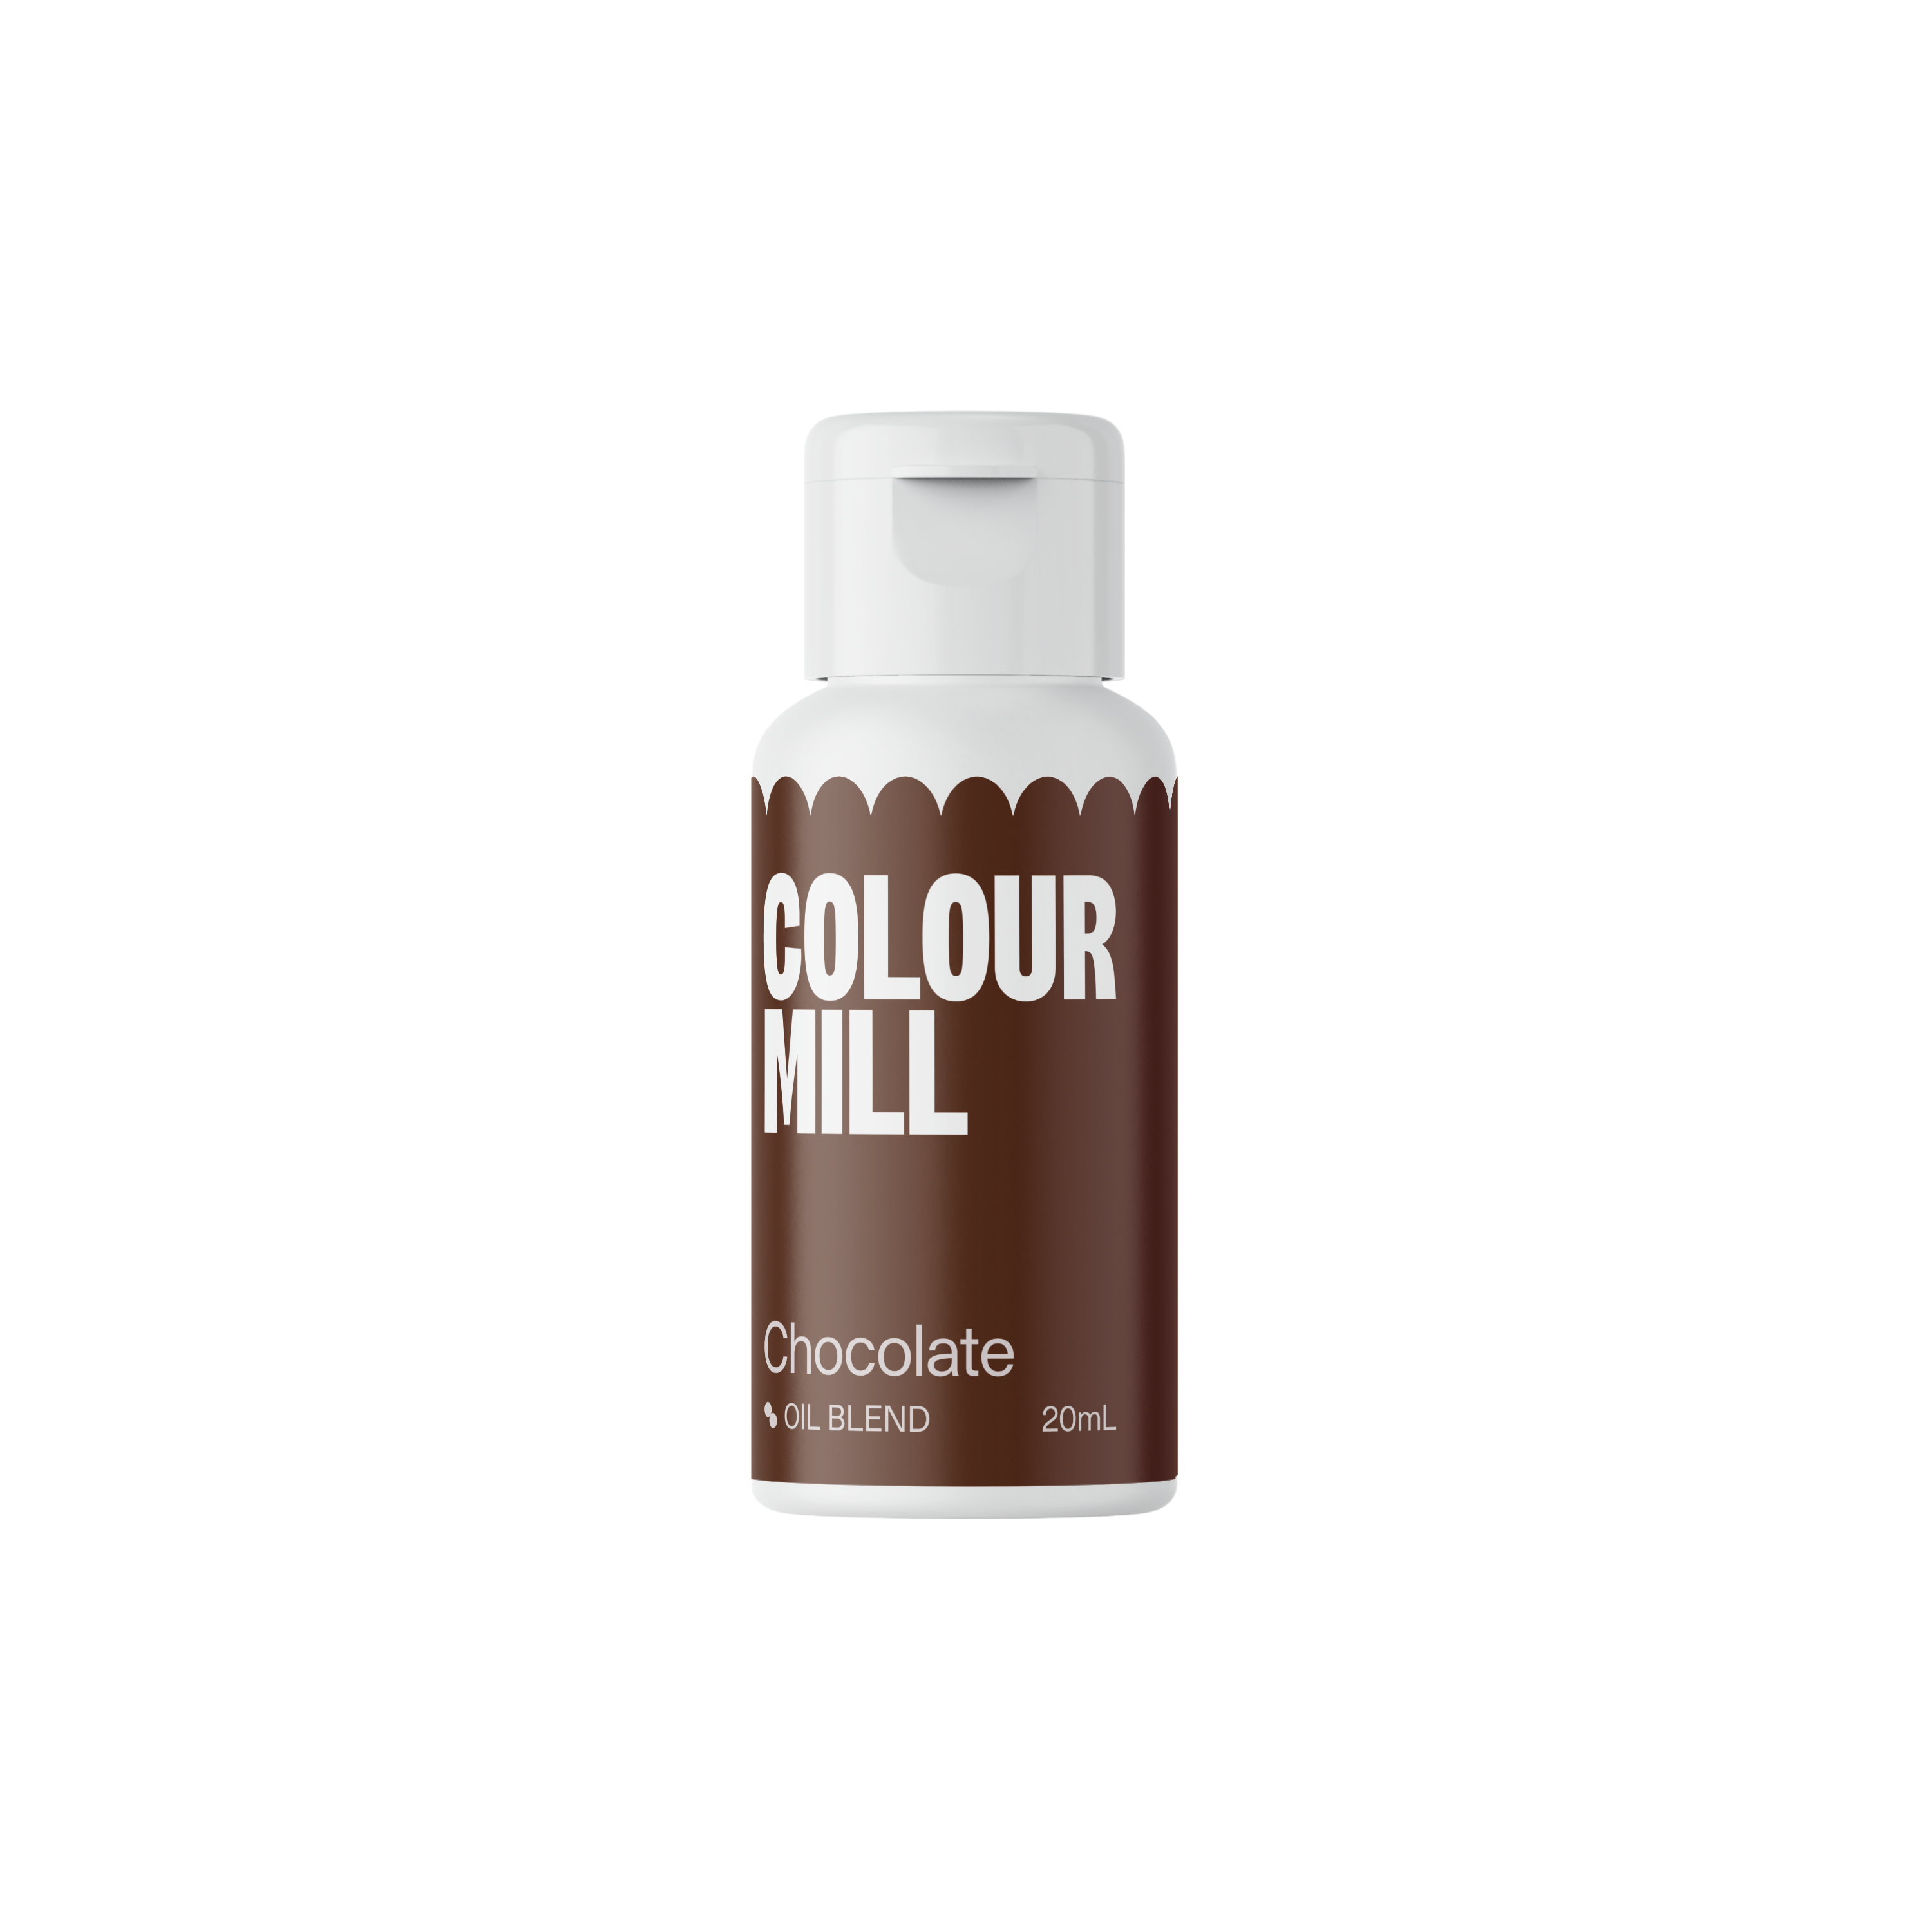 Chocolate - Oil Blendproduct image